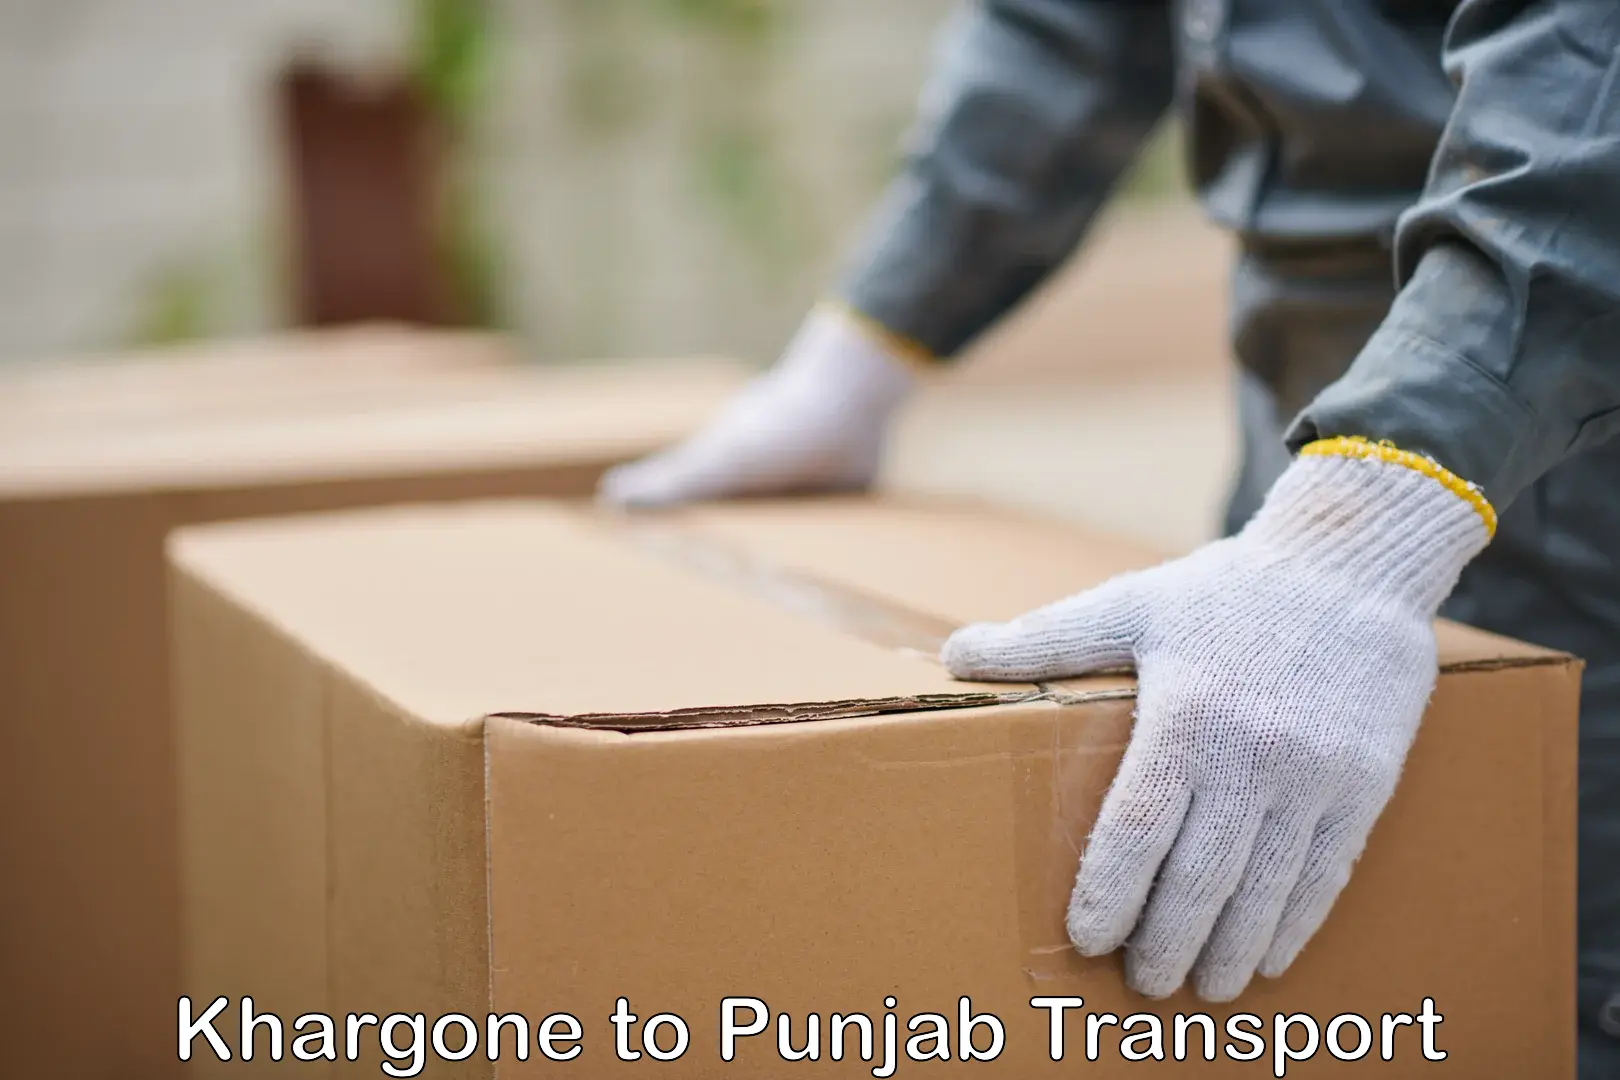 Truck transport companies in India Khargone to Patiala